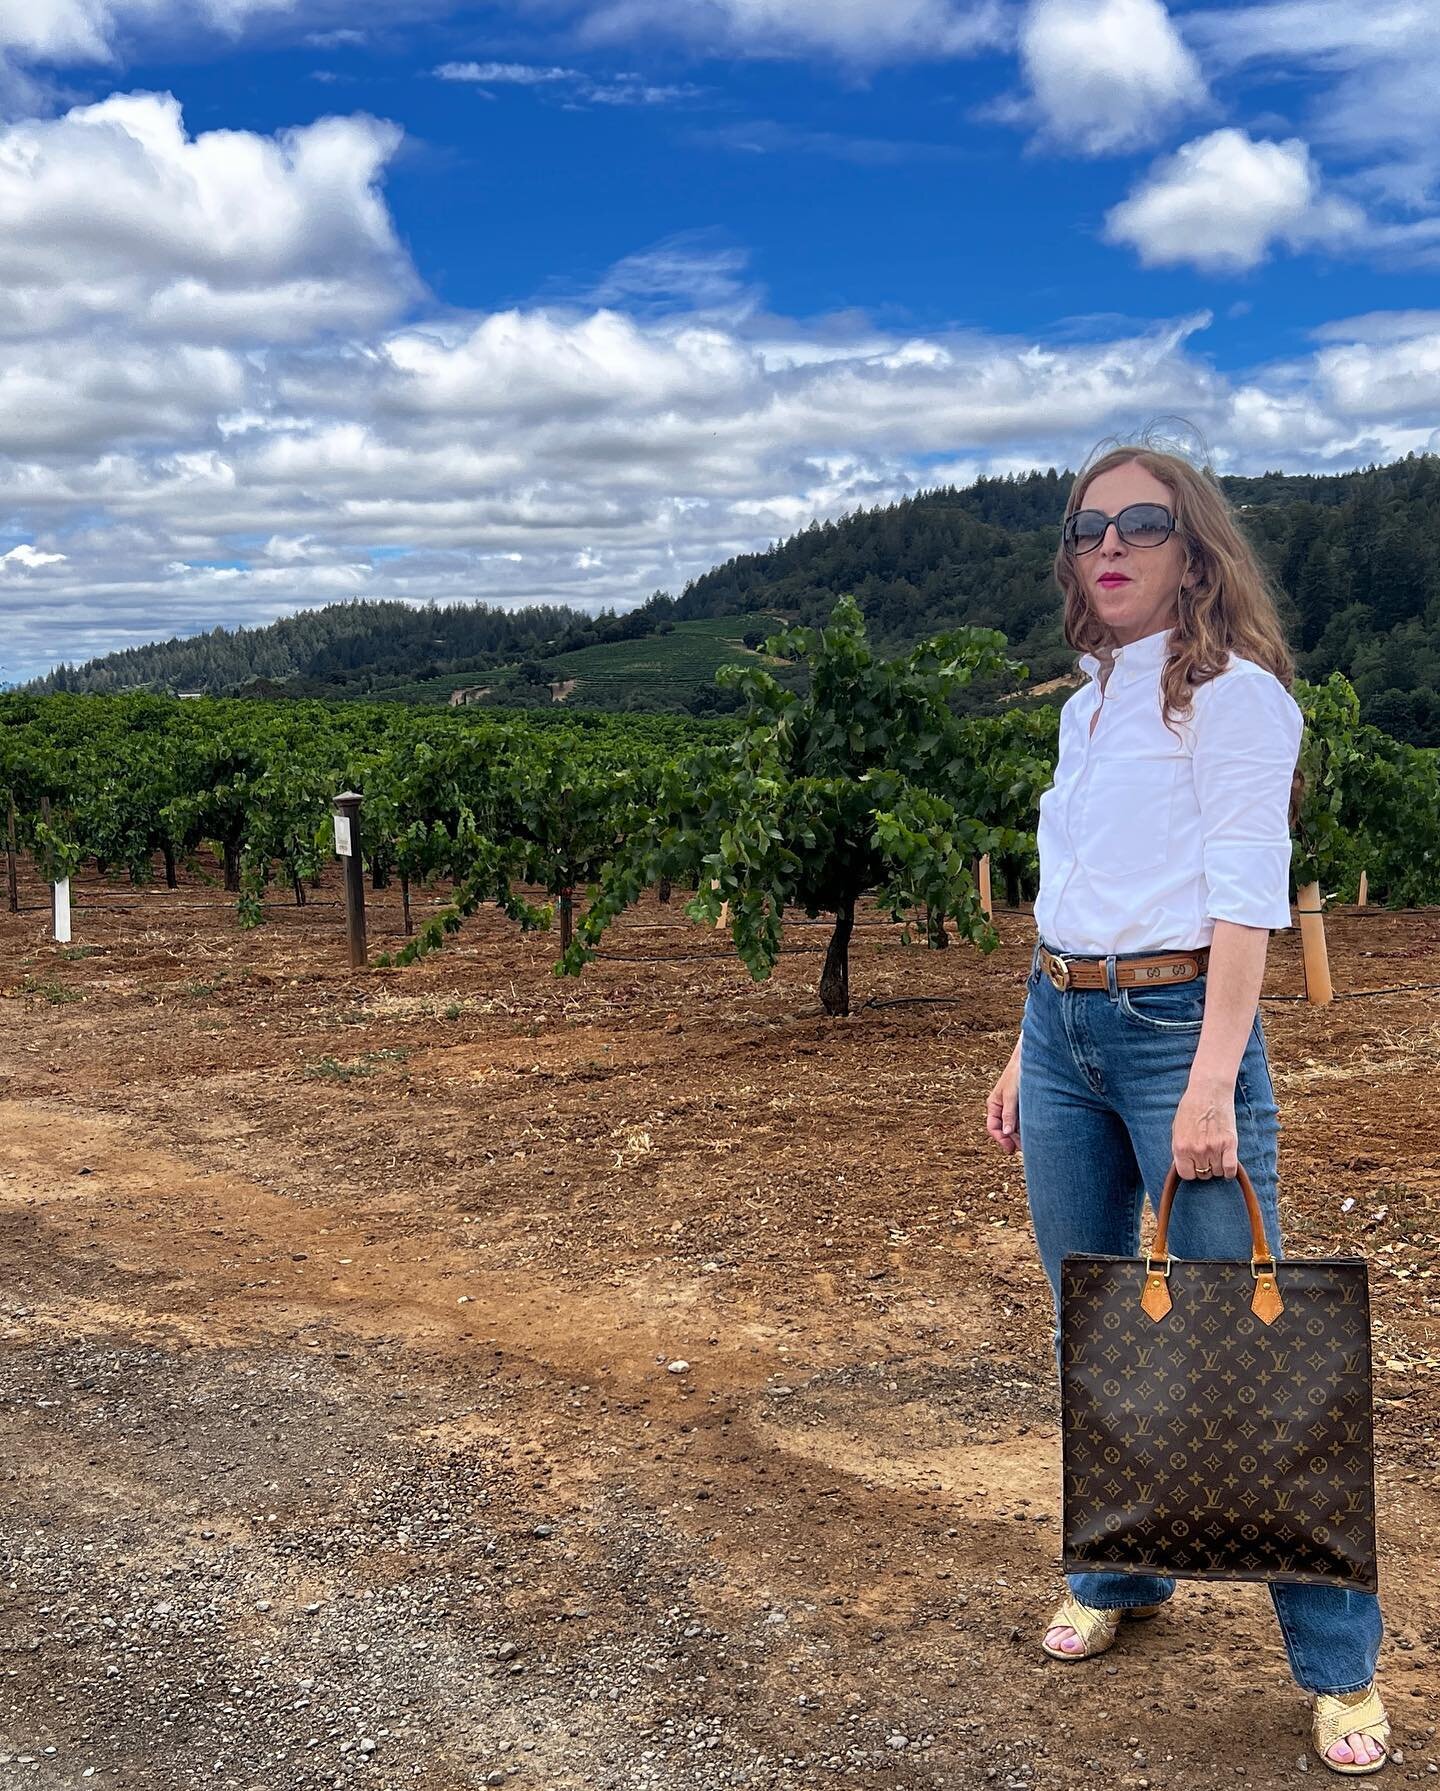 Hey! I have handbags on Phlox now including this very chic @louisvuitton shopper tote. This fabulous  bag really pulls a look together. 
Available now on the site. DM with questions! Had fun on this photo shoot in wine country with @creo_quindi 
#lou